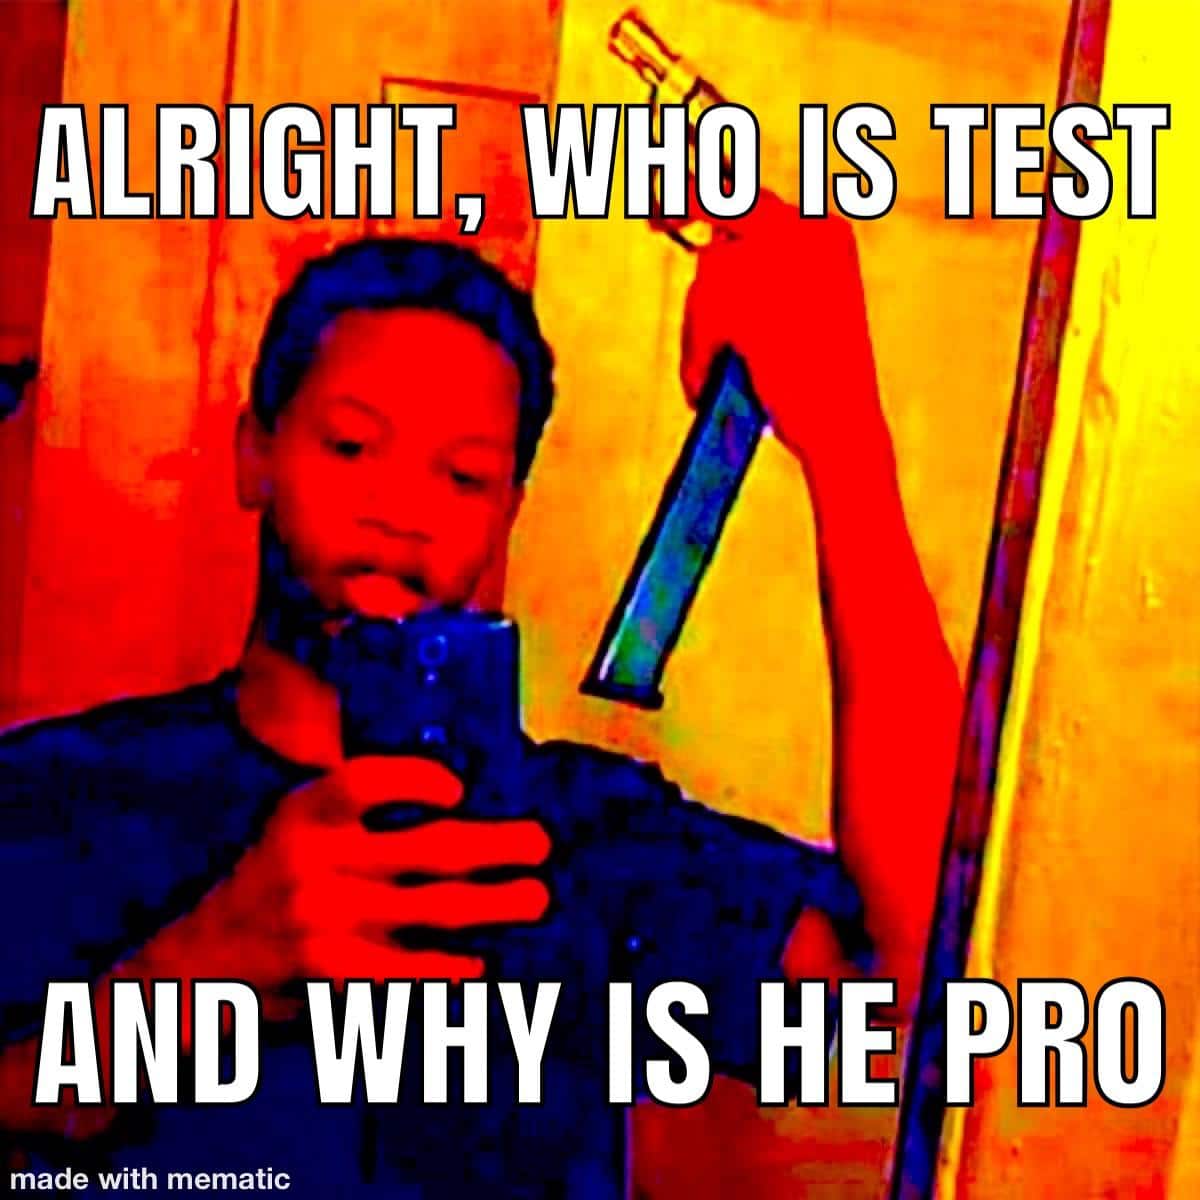 Deep-fried, Test Deep Fried Memes Deep-fried, Test text: AND WHY IS HE PRO made with mematic 